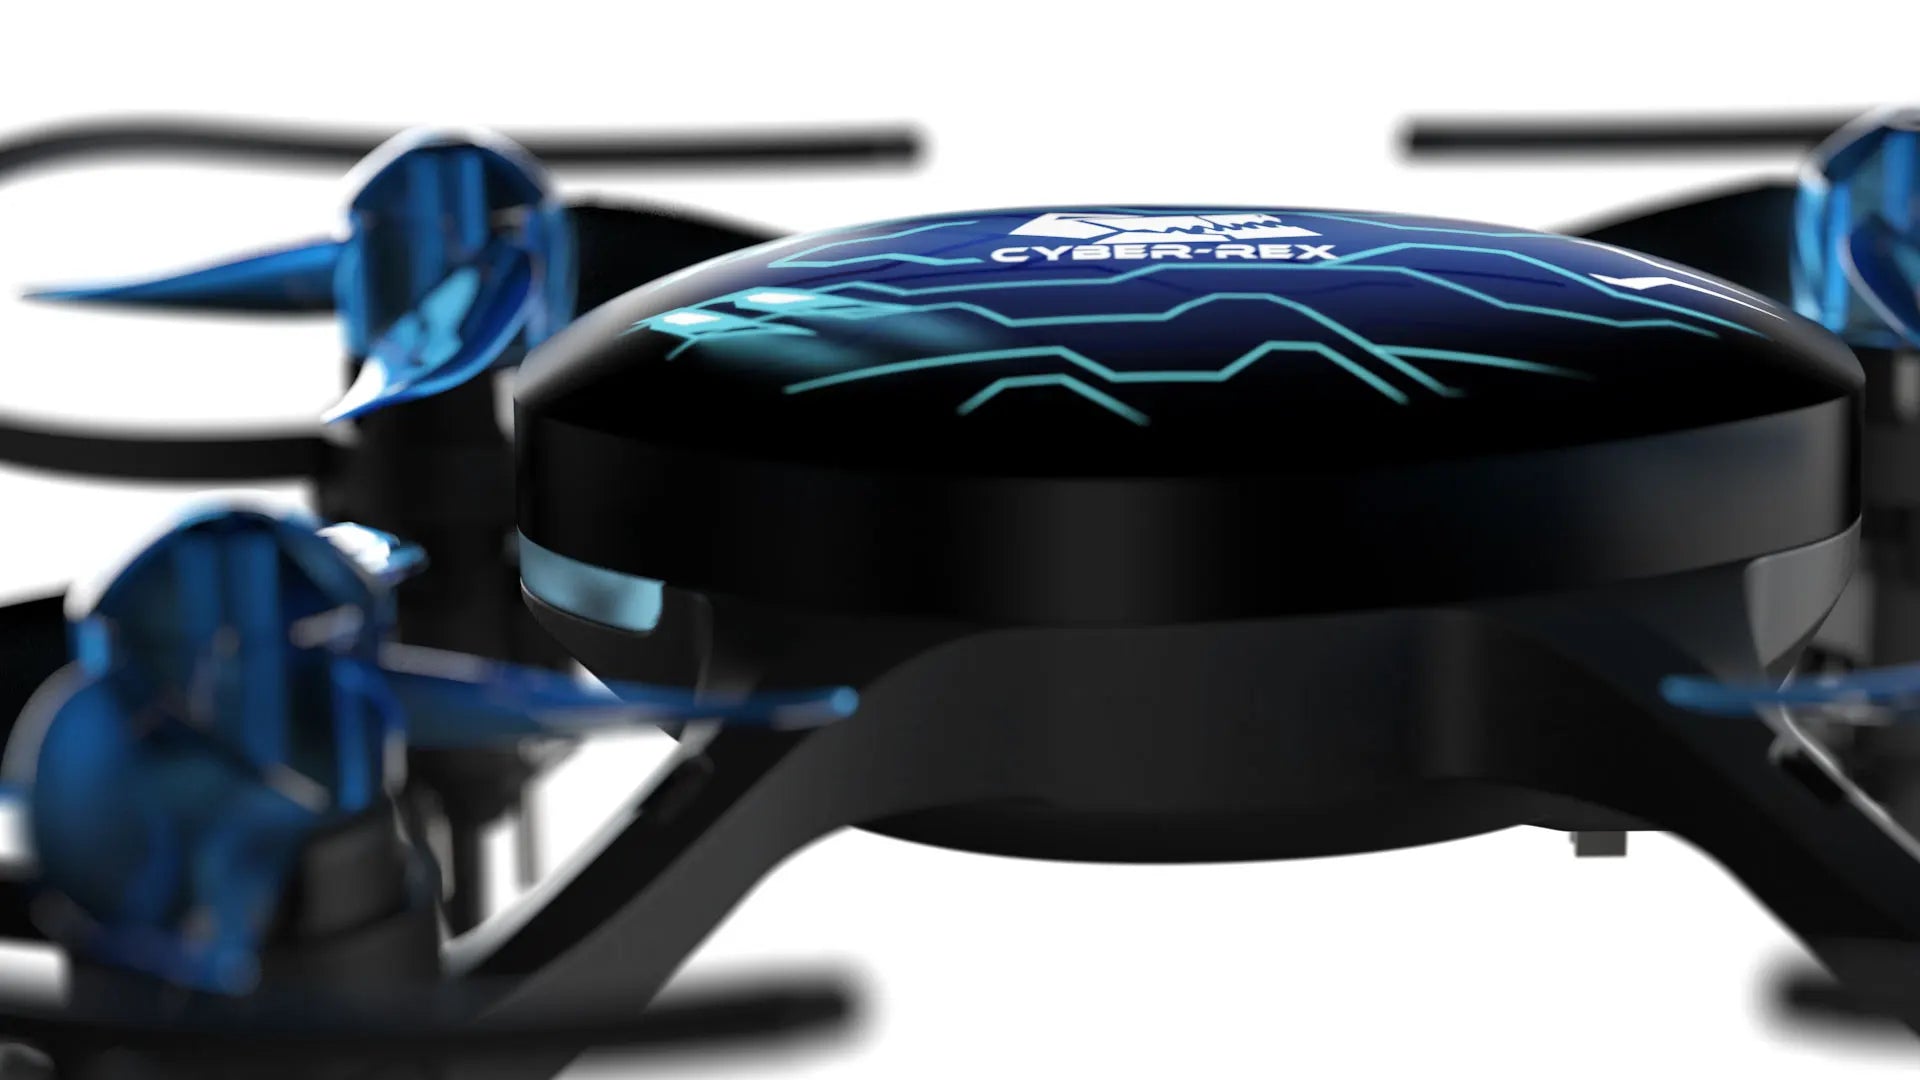 EMAX ThrillMotion Cyber-Rex Quadcopter, lithium polymer batteries are known for their lightweight design and high energy density . they are ideal